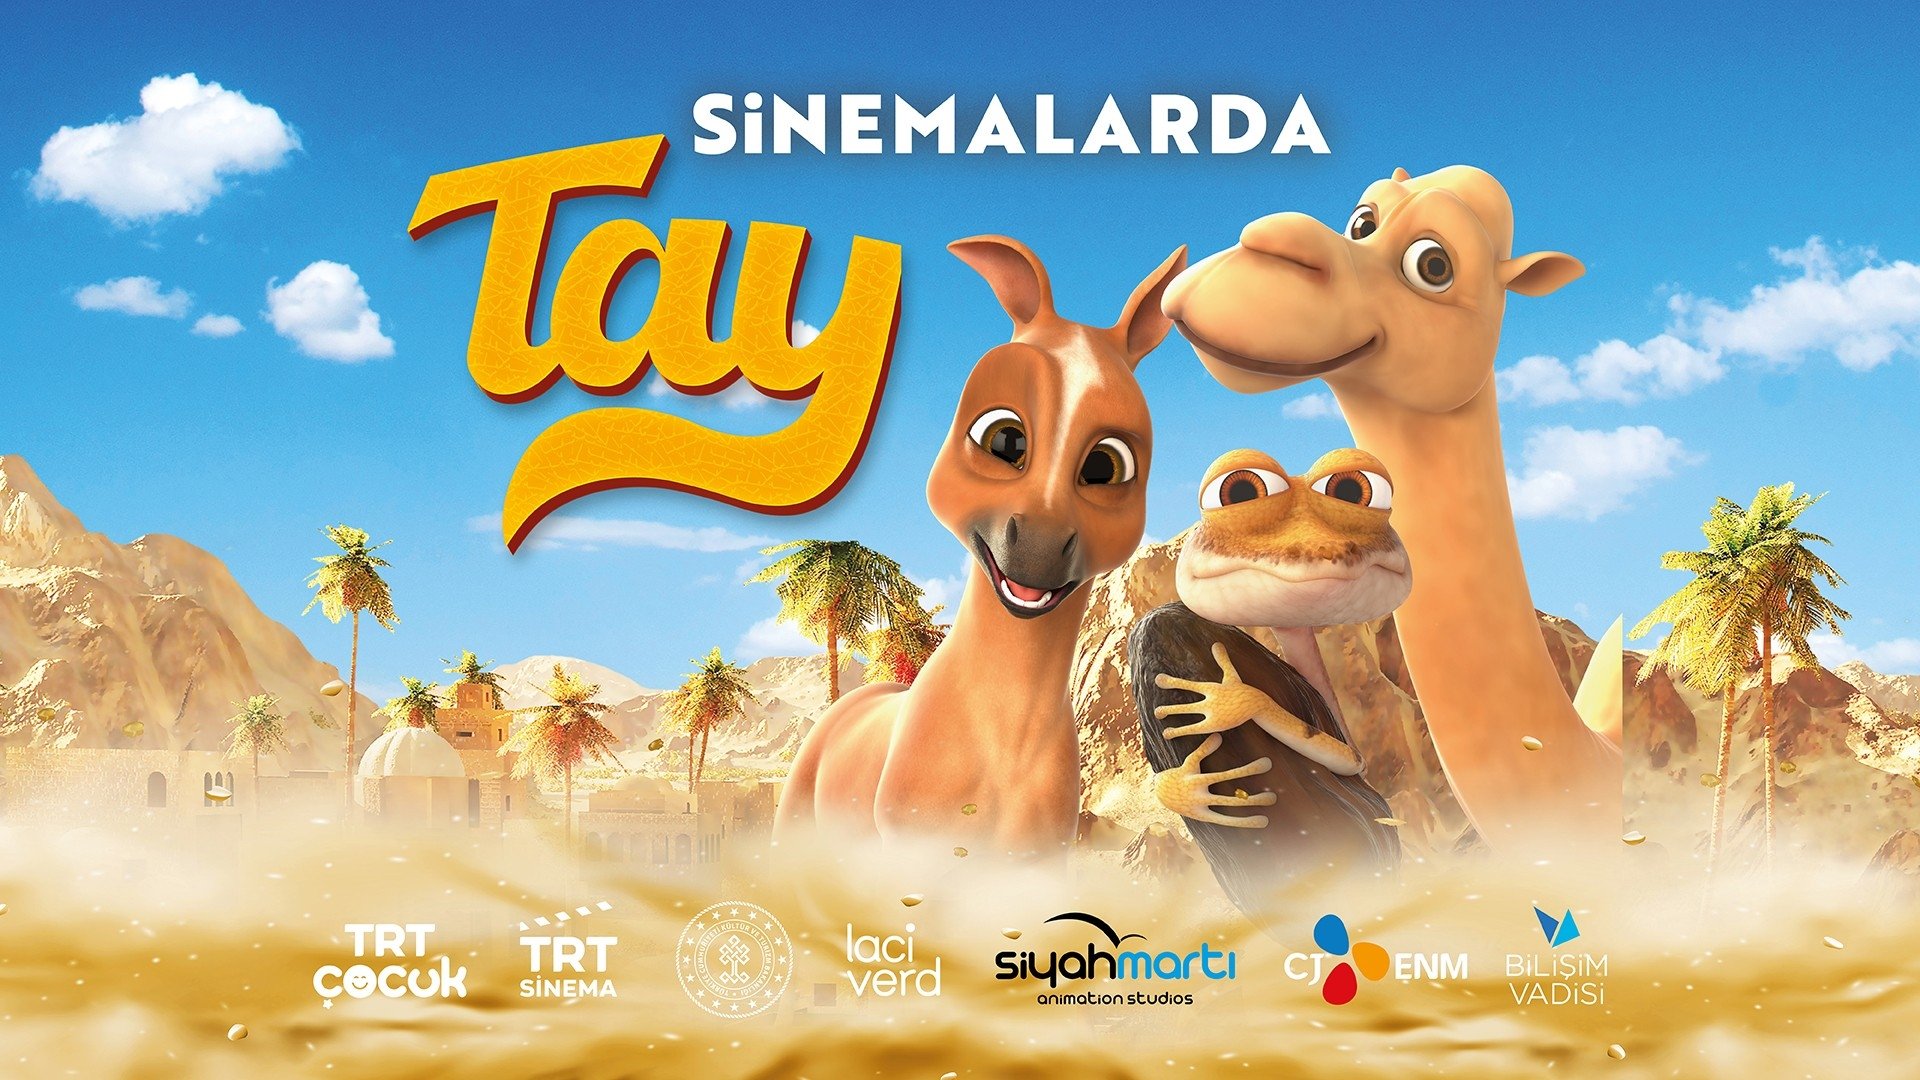 Animation 'Tay' tells story of Prophet Muhammad's migration | Daily Sabah